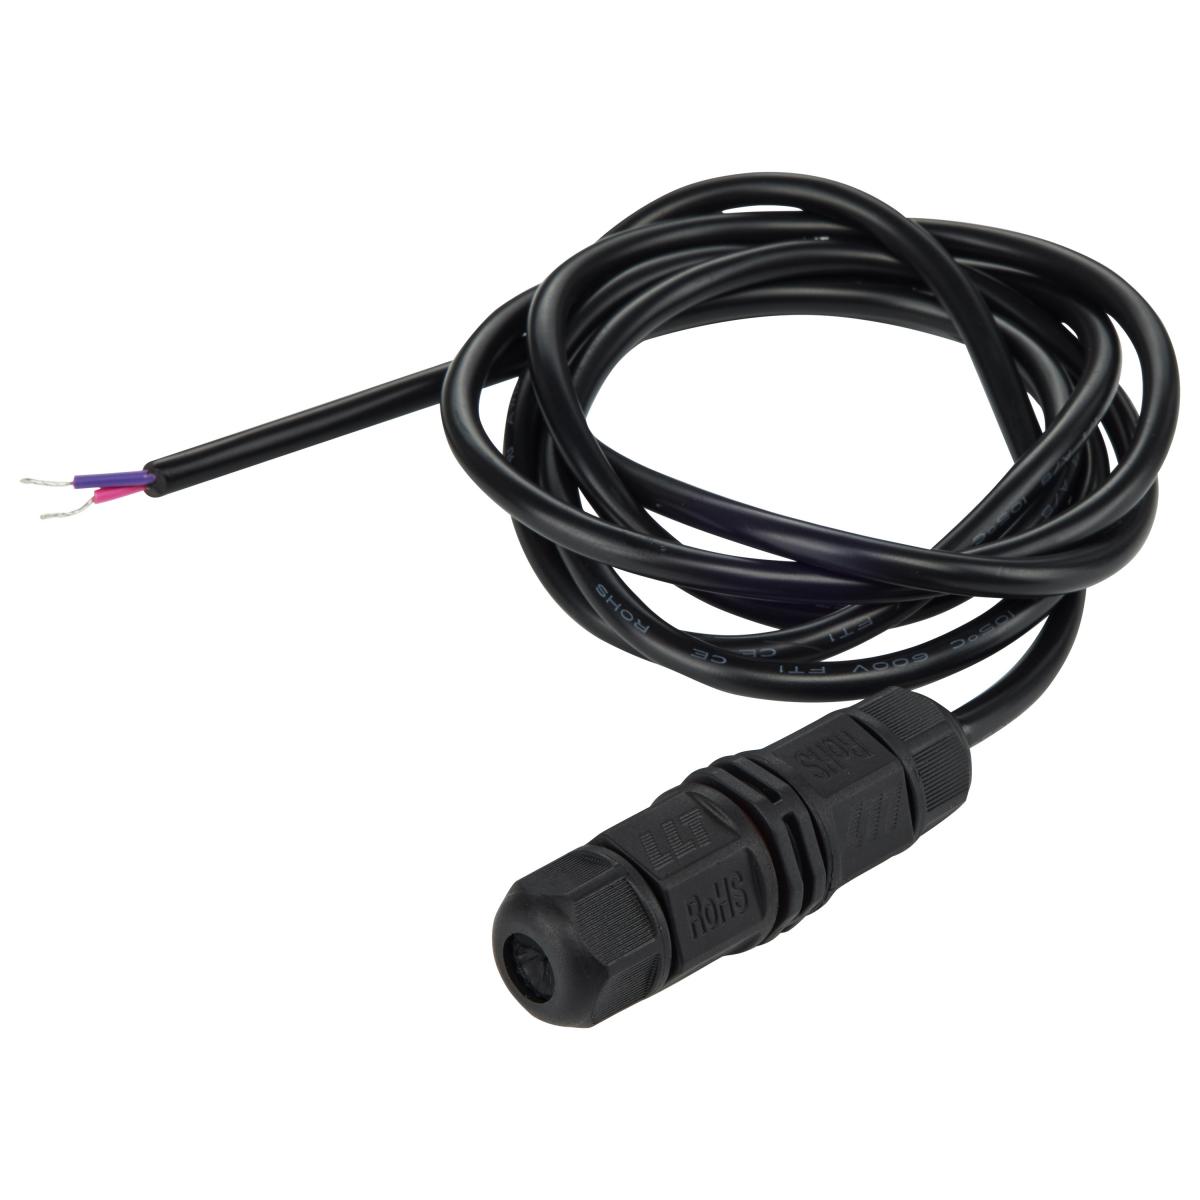 65-169 IP68 CONNECTOR WITH 5.5FT WHIP